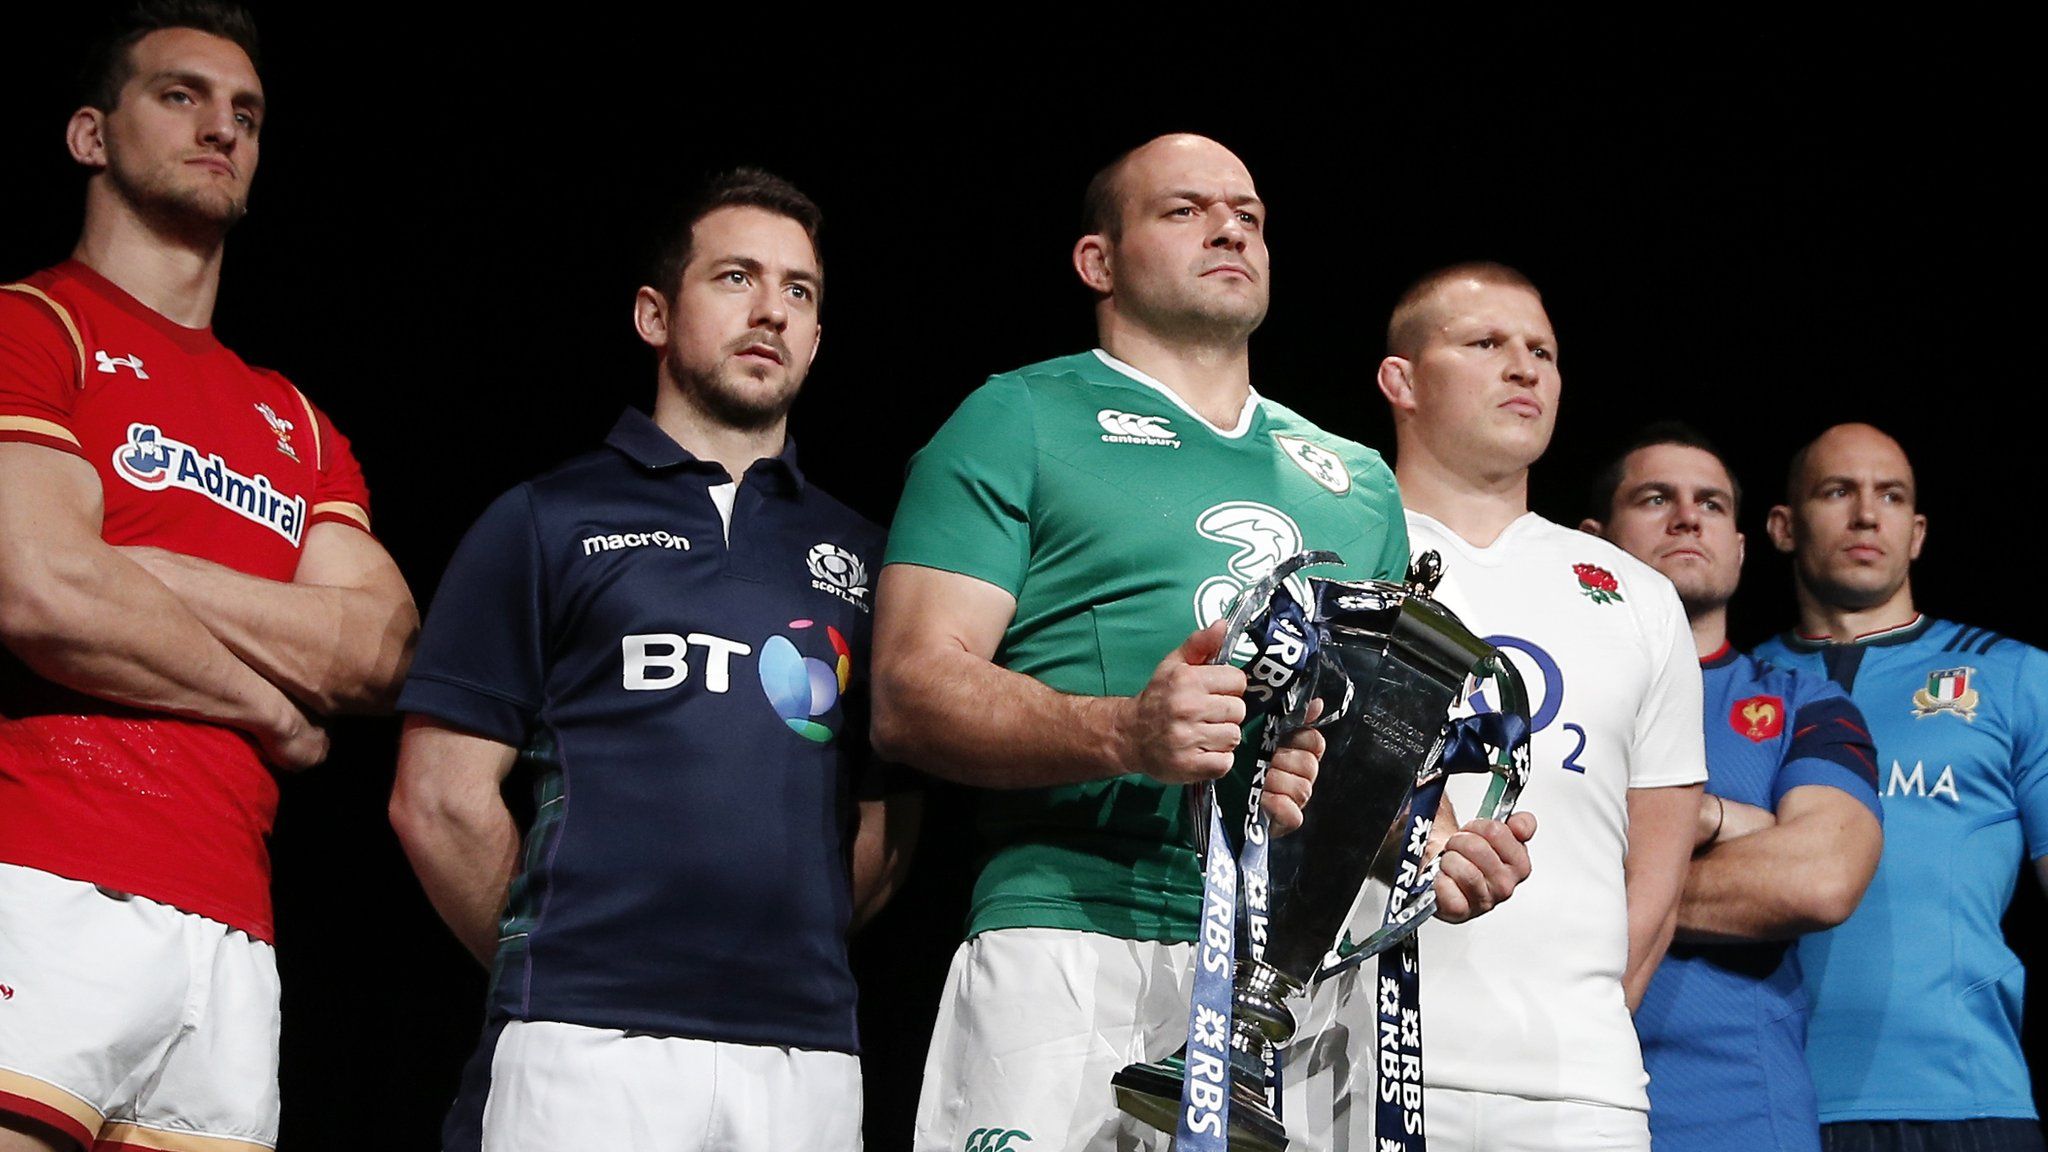 2016 Six Nations captains: Wales' Sam Warburton, Scotland's Greg Laidlaw, Ireland's Rory Best holding the trophy, England's Dylan Hartley, France's Guilhem Guirado and Italy's Sergio Parisse